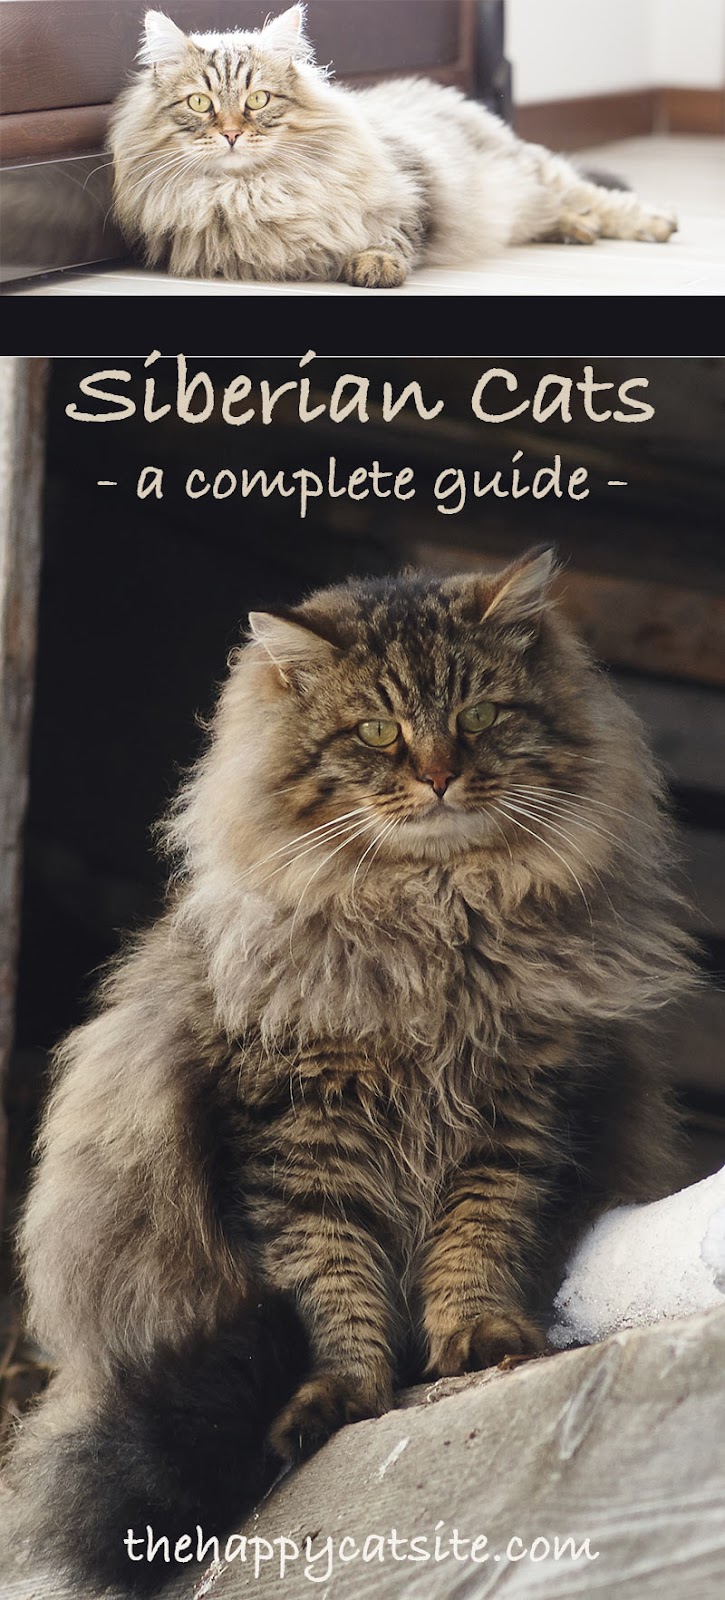 Siberian Cat: A Complete Guide to the Unique Siberian Forest Cat